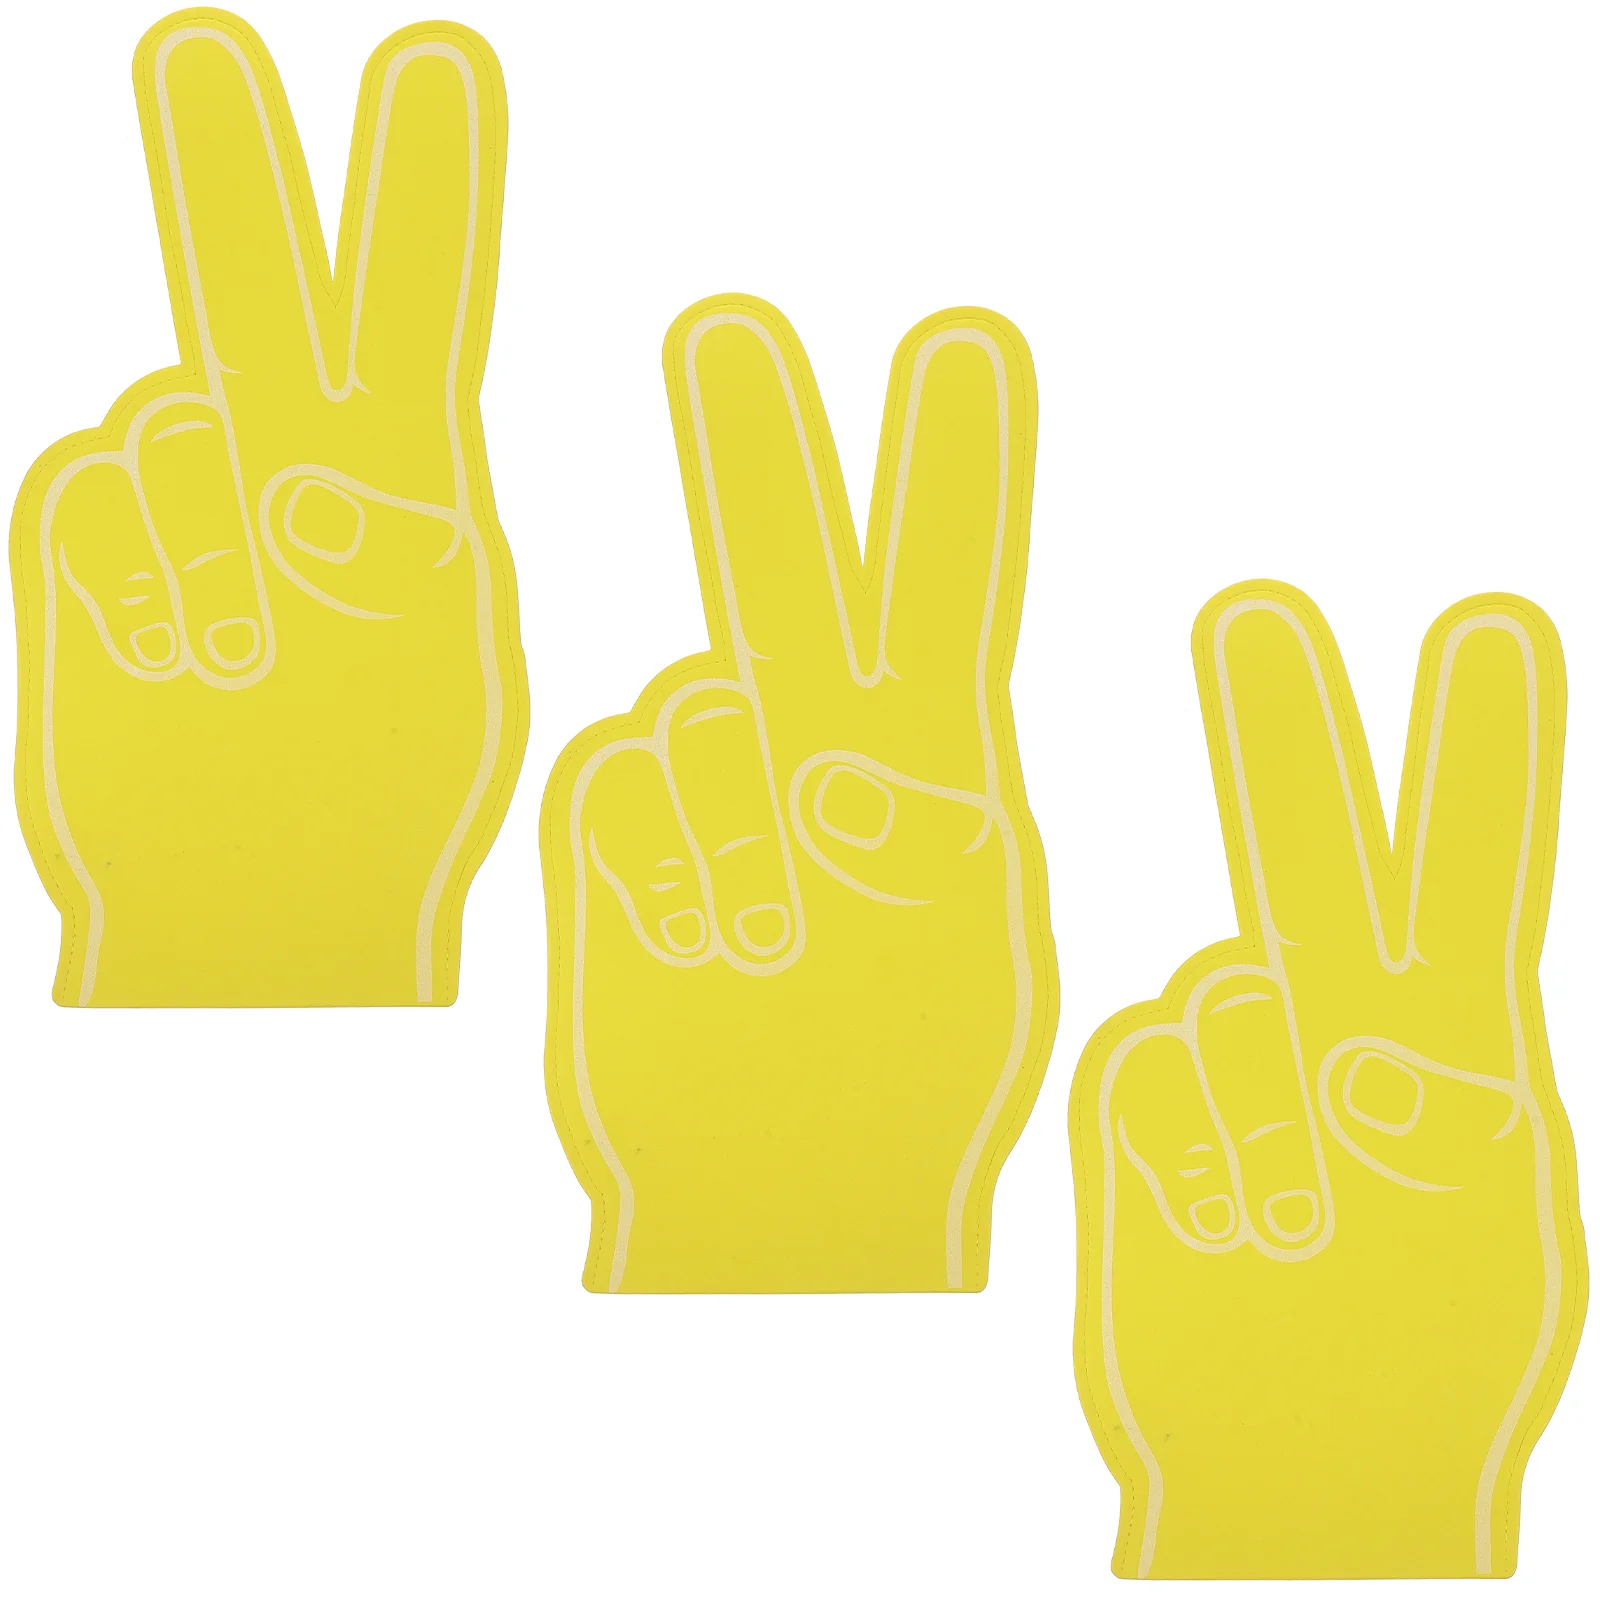 

3 Pcs Foam Fingers Cheer Pom Poms Cheerleading Party Supplies Eva Football Game Noise Makers Props